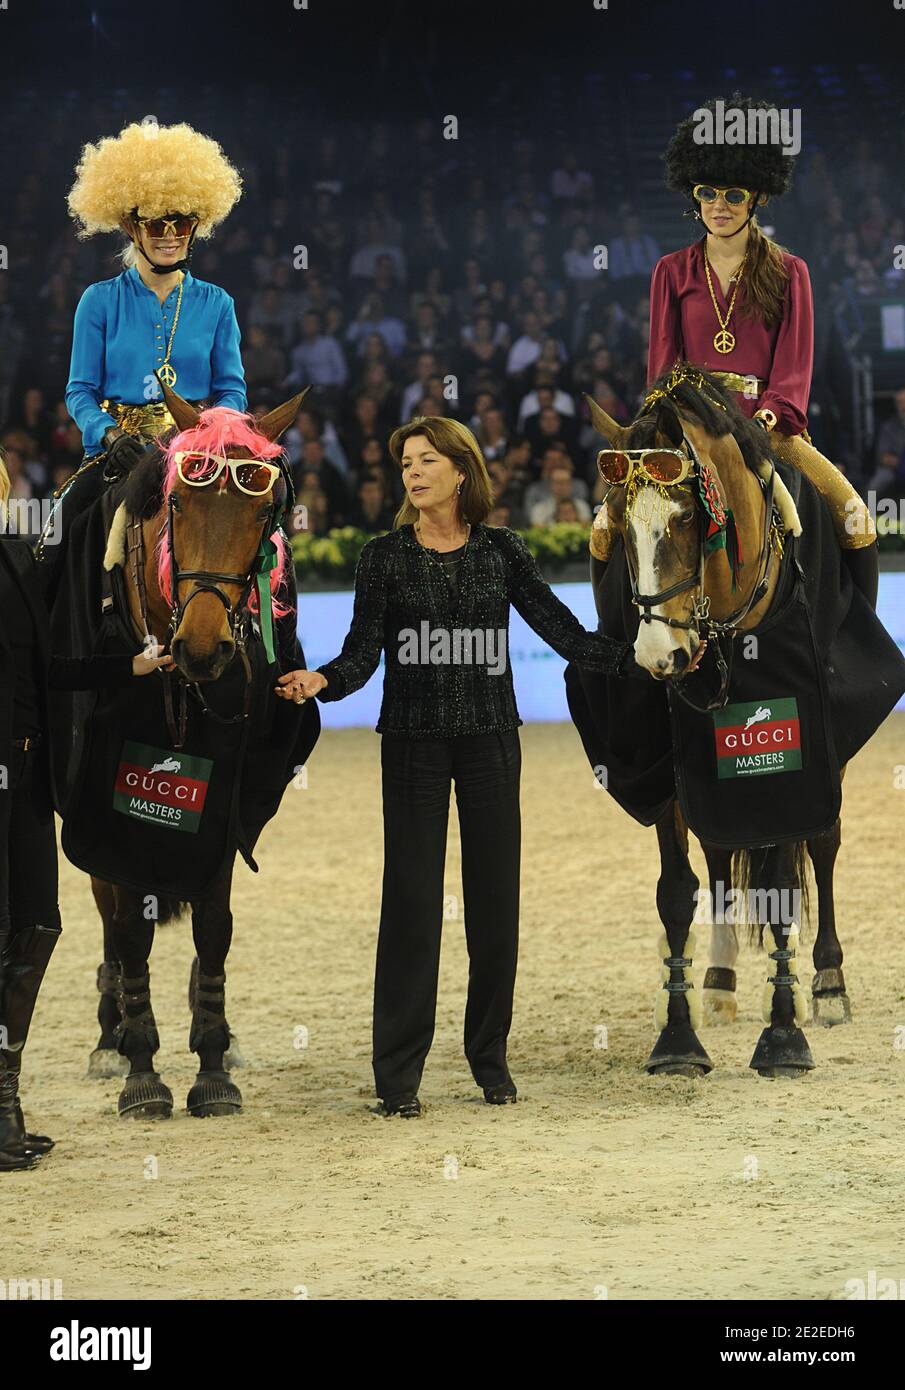 Caroline of Hanover, Charlotte Casaraghi and Edwina Tops-Alexander participate at the Amade price during the Gucci Masters International Jumping Competition in Villepinte, North of Paris, France on December 3, 2011. Photo by Giancarlo Gorassini/ABACAPRESS.COM Stock Photo